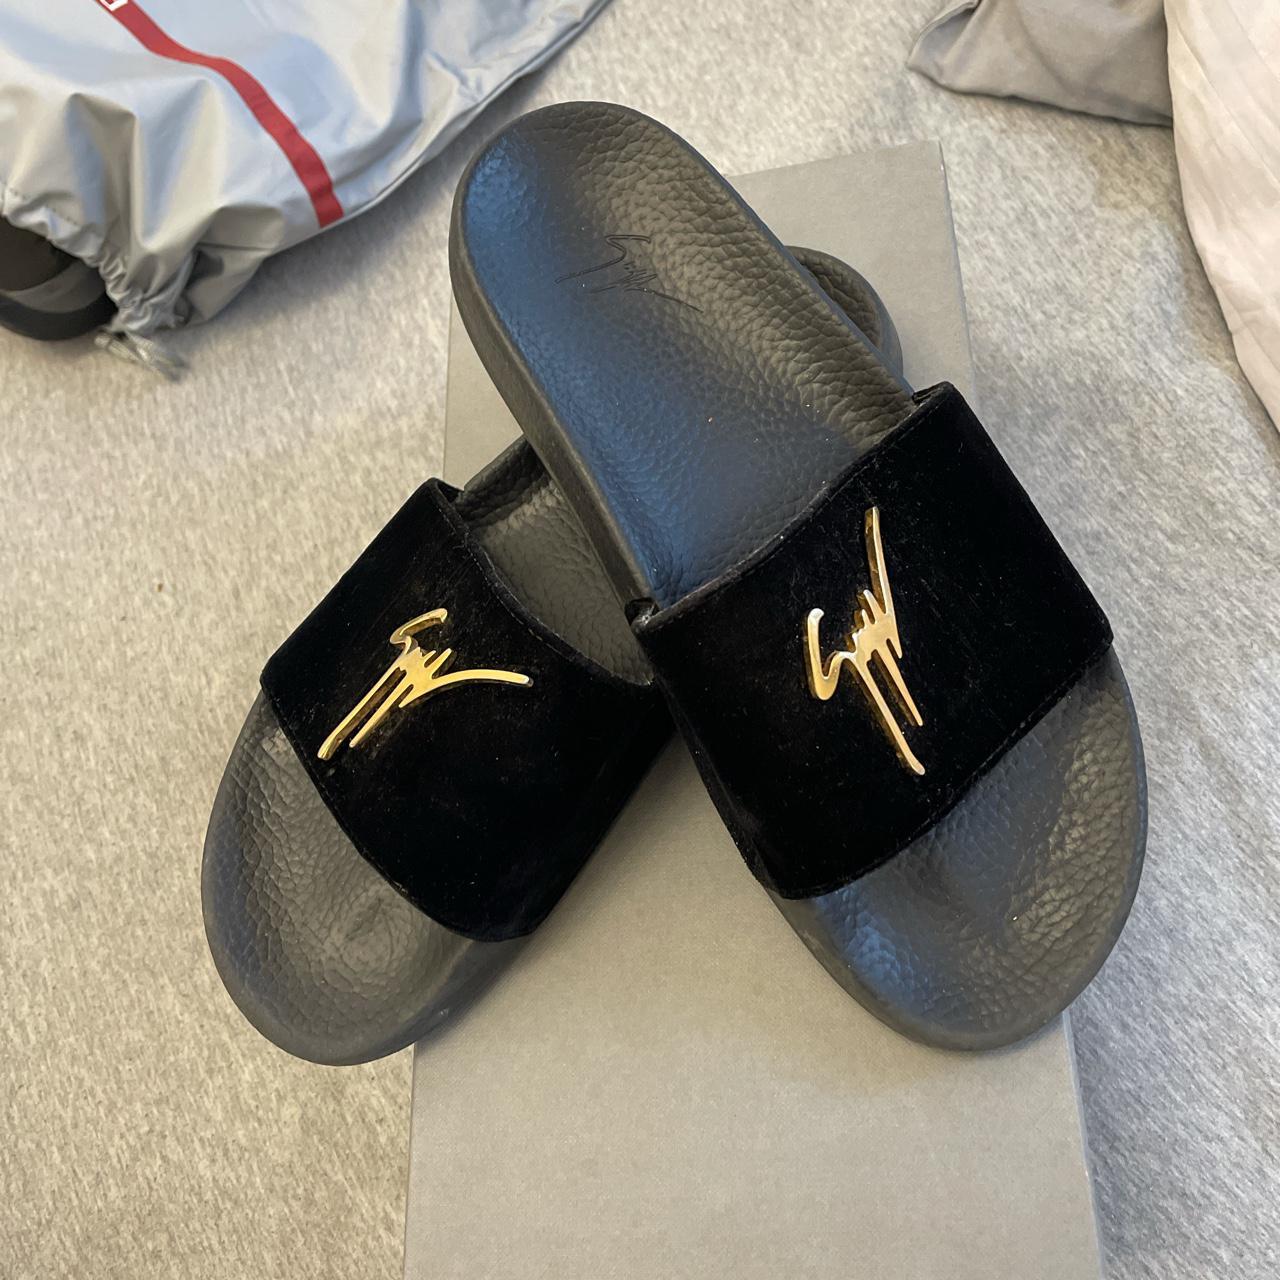 Giuseppe sliders - comes with original box and dust... - Depop